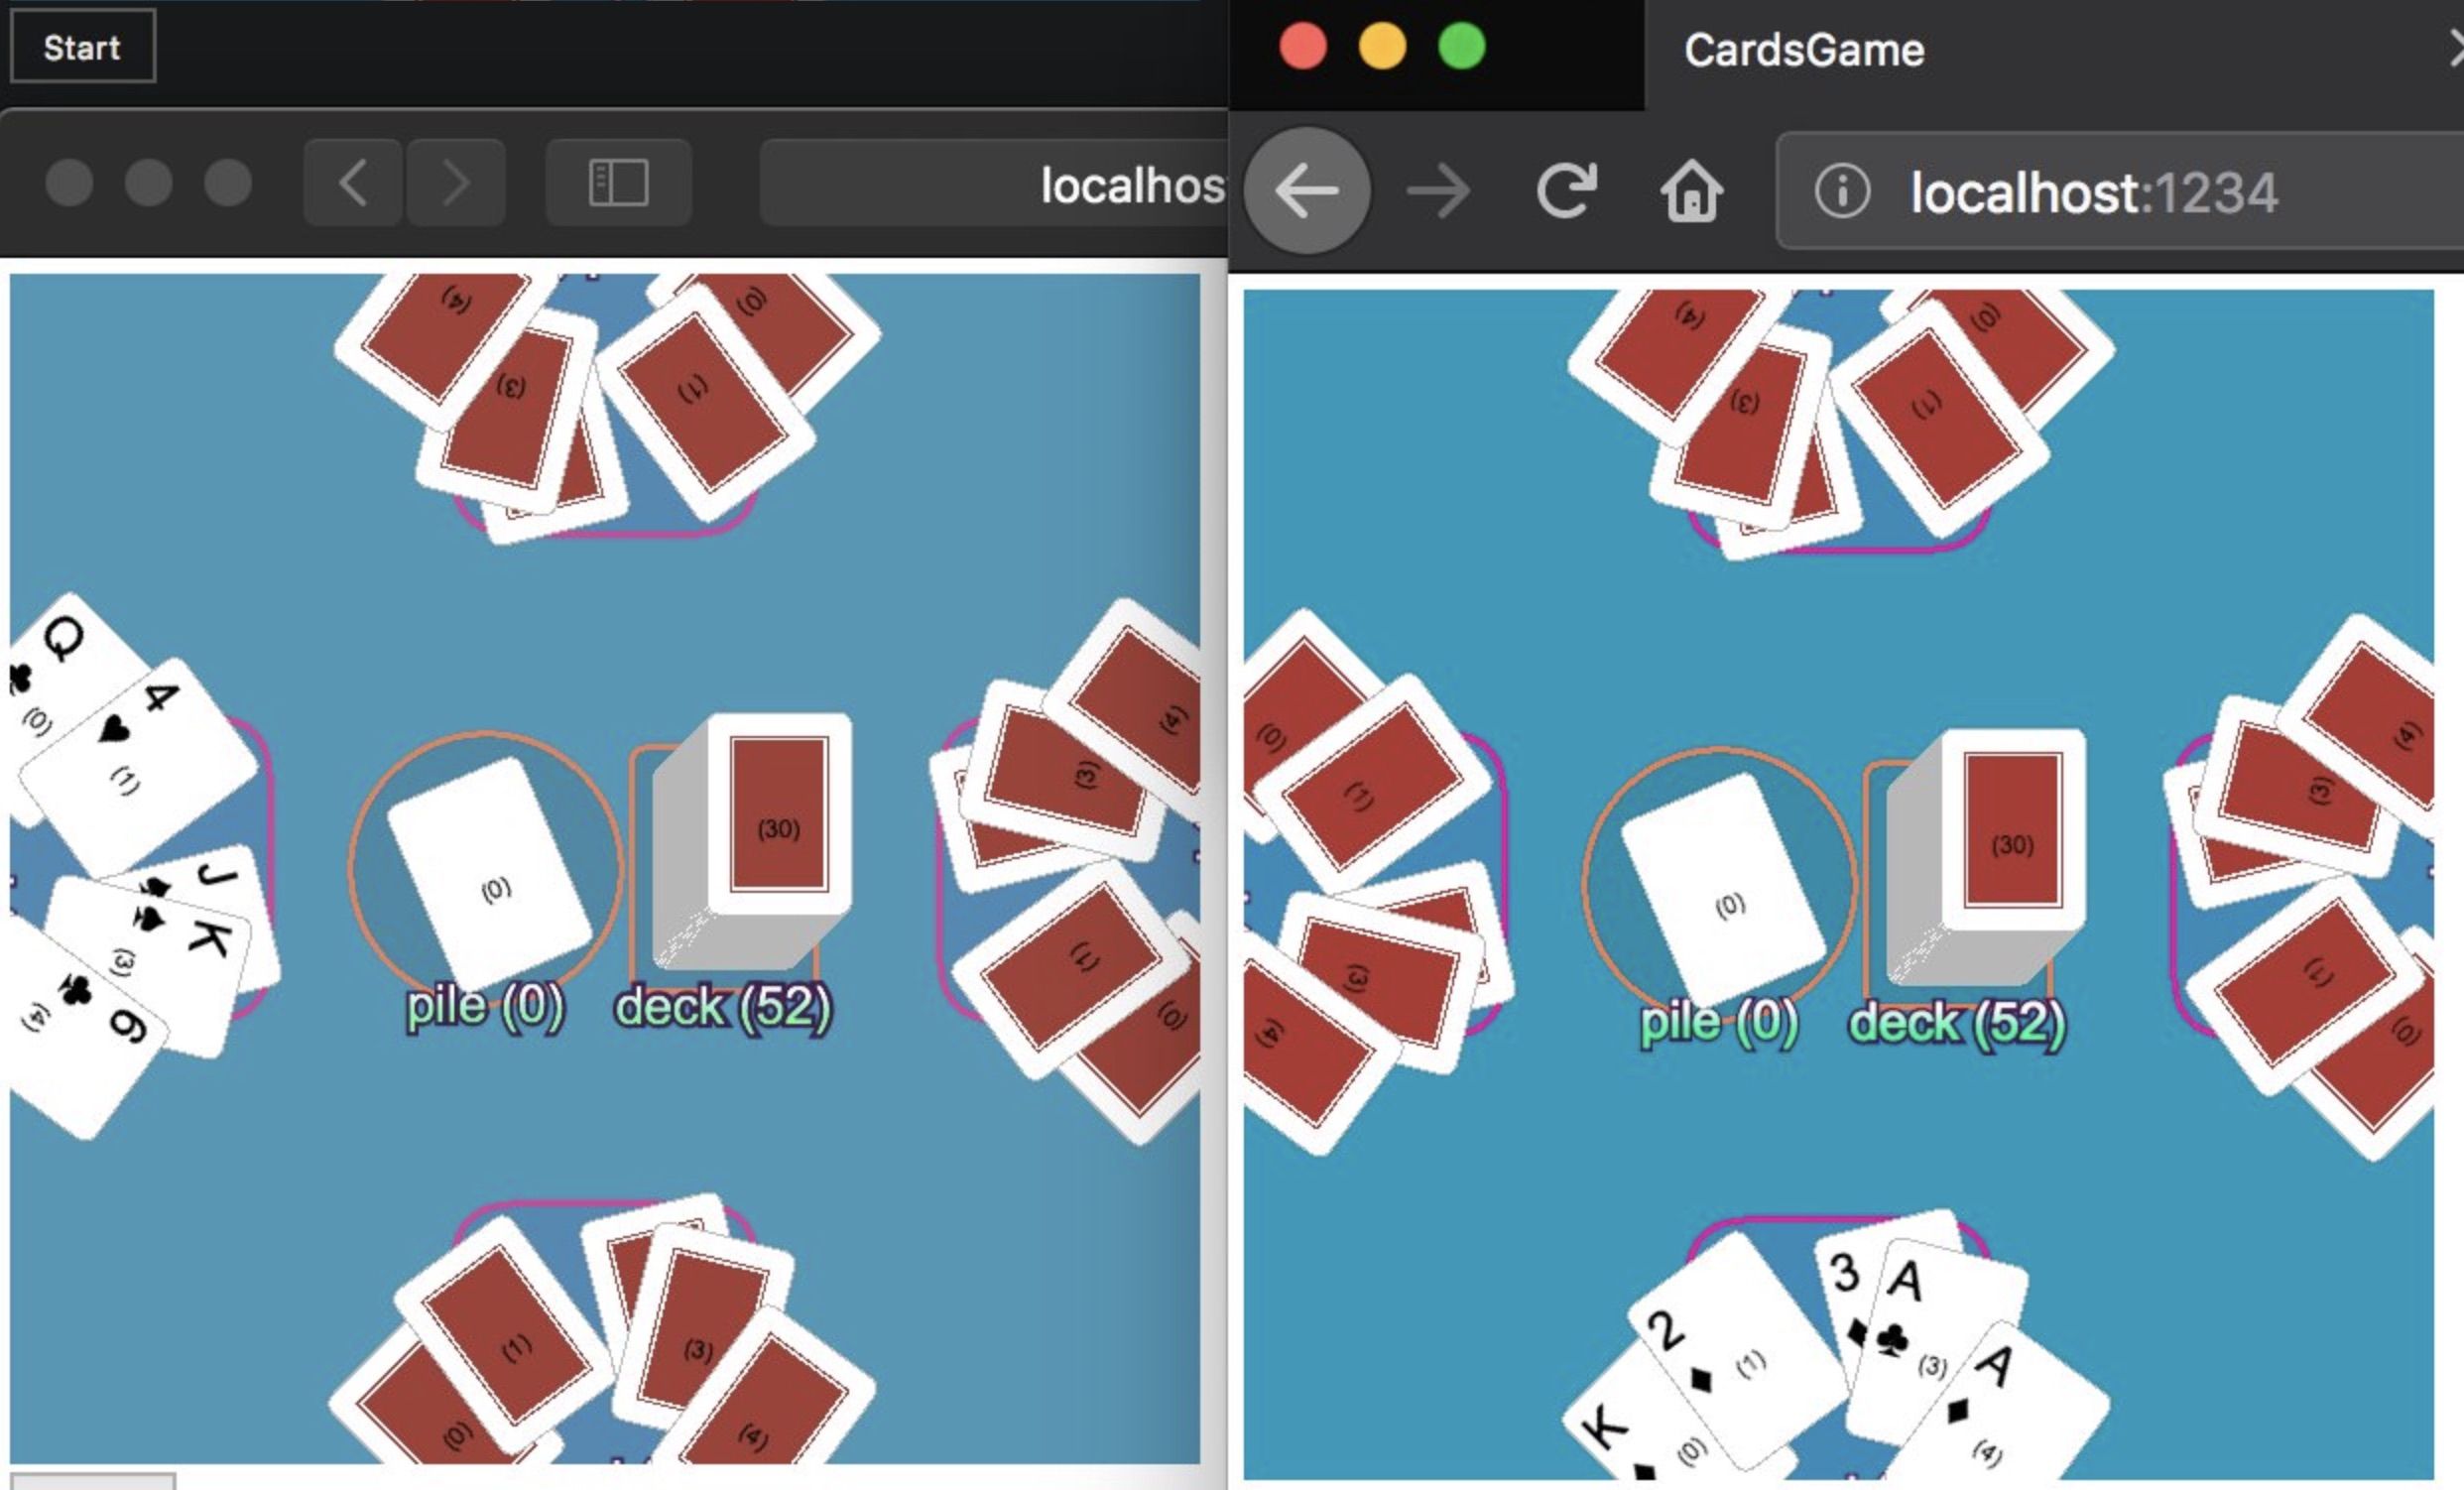 Previous iteration of game using PIXI.js